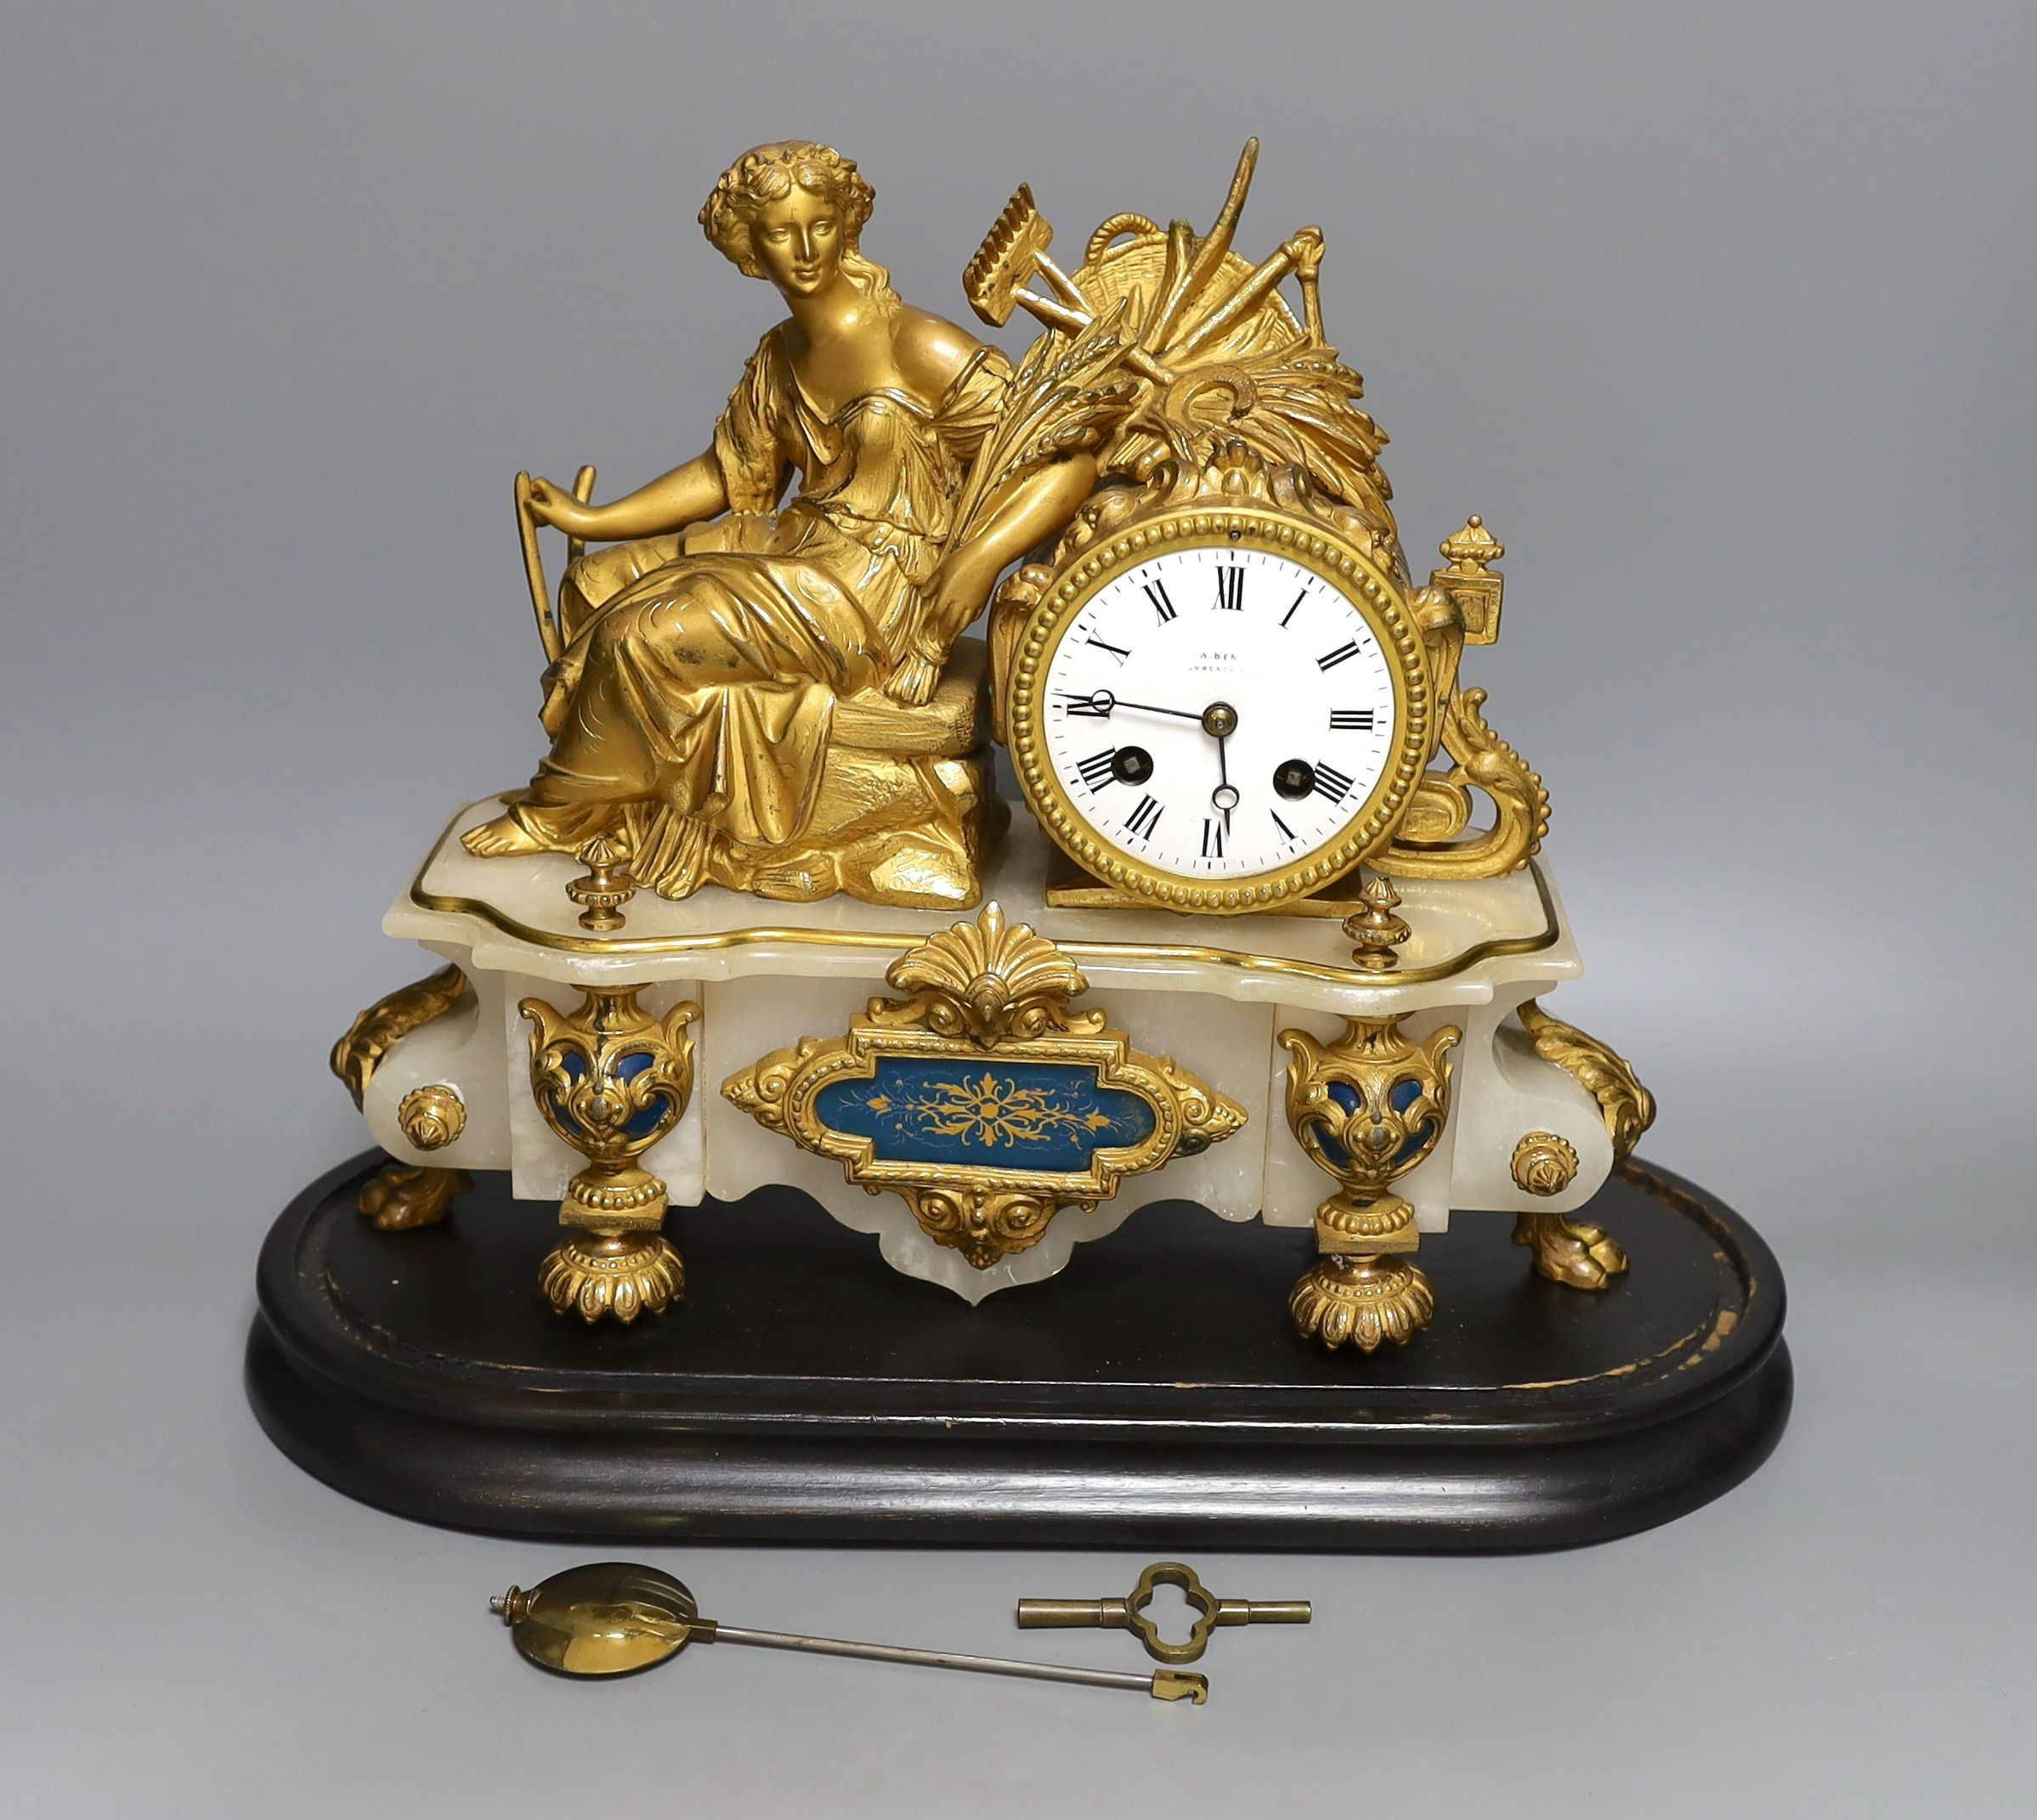 A 19th century French gilt metal and alabaster figural mantle clock with key and pendulum